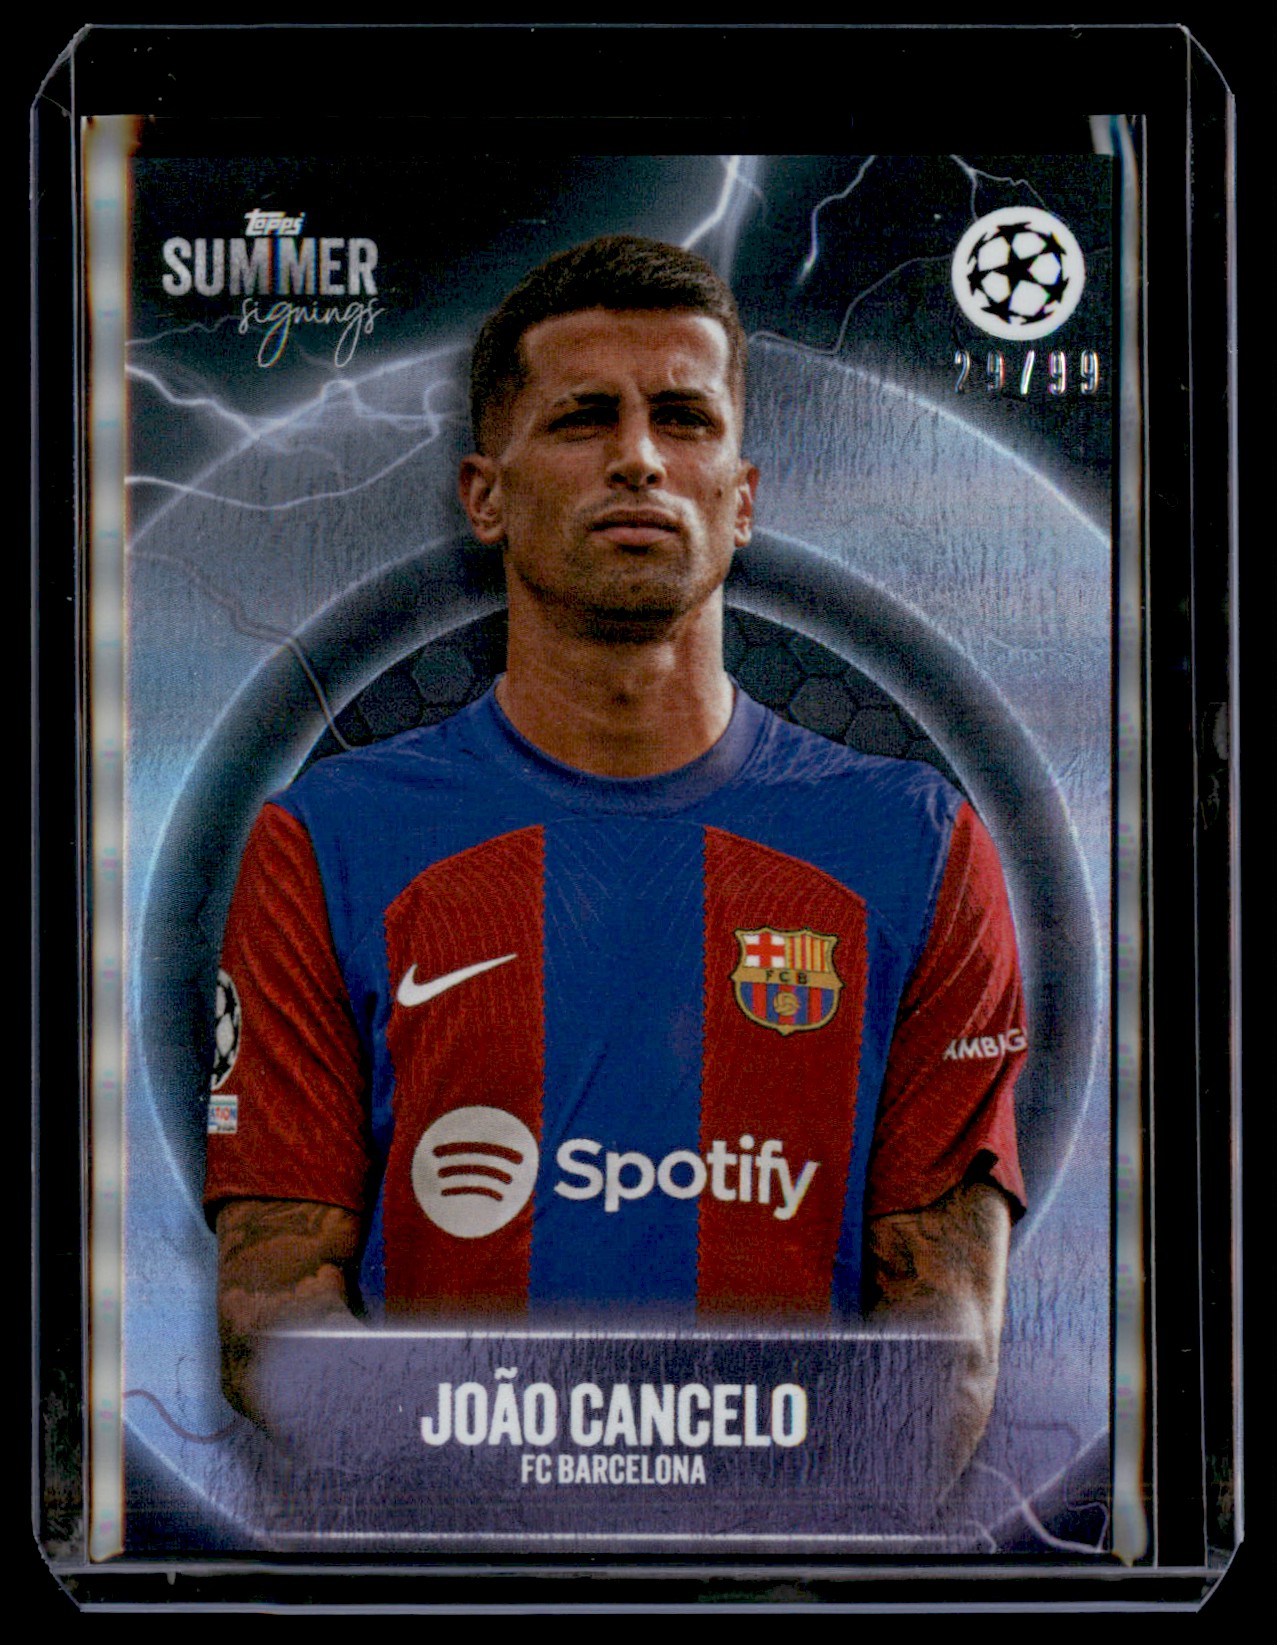 2023 topps summer signings joao cancelo card front image